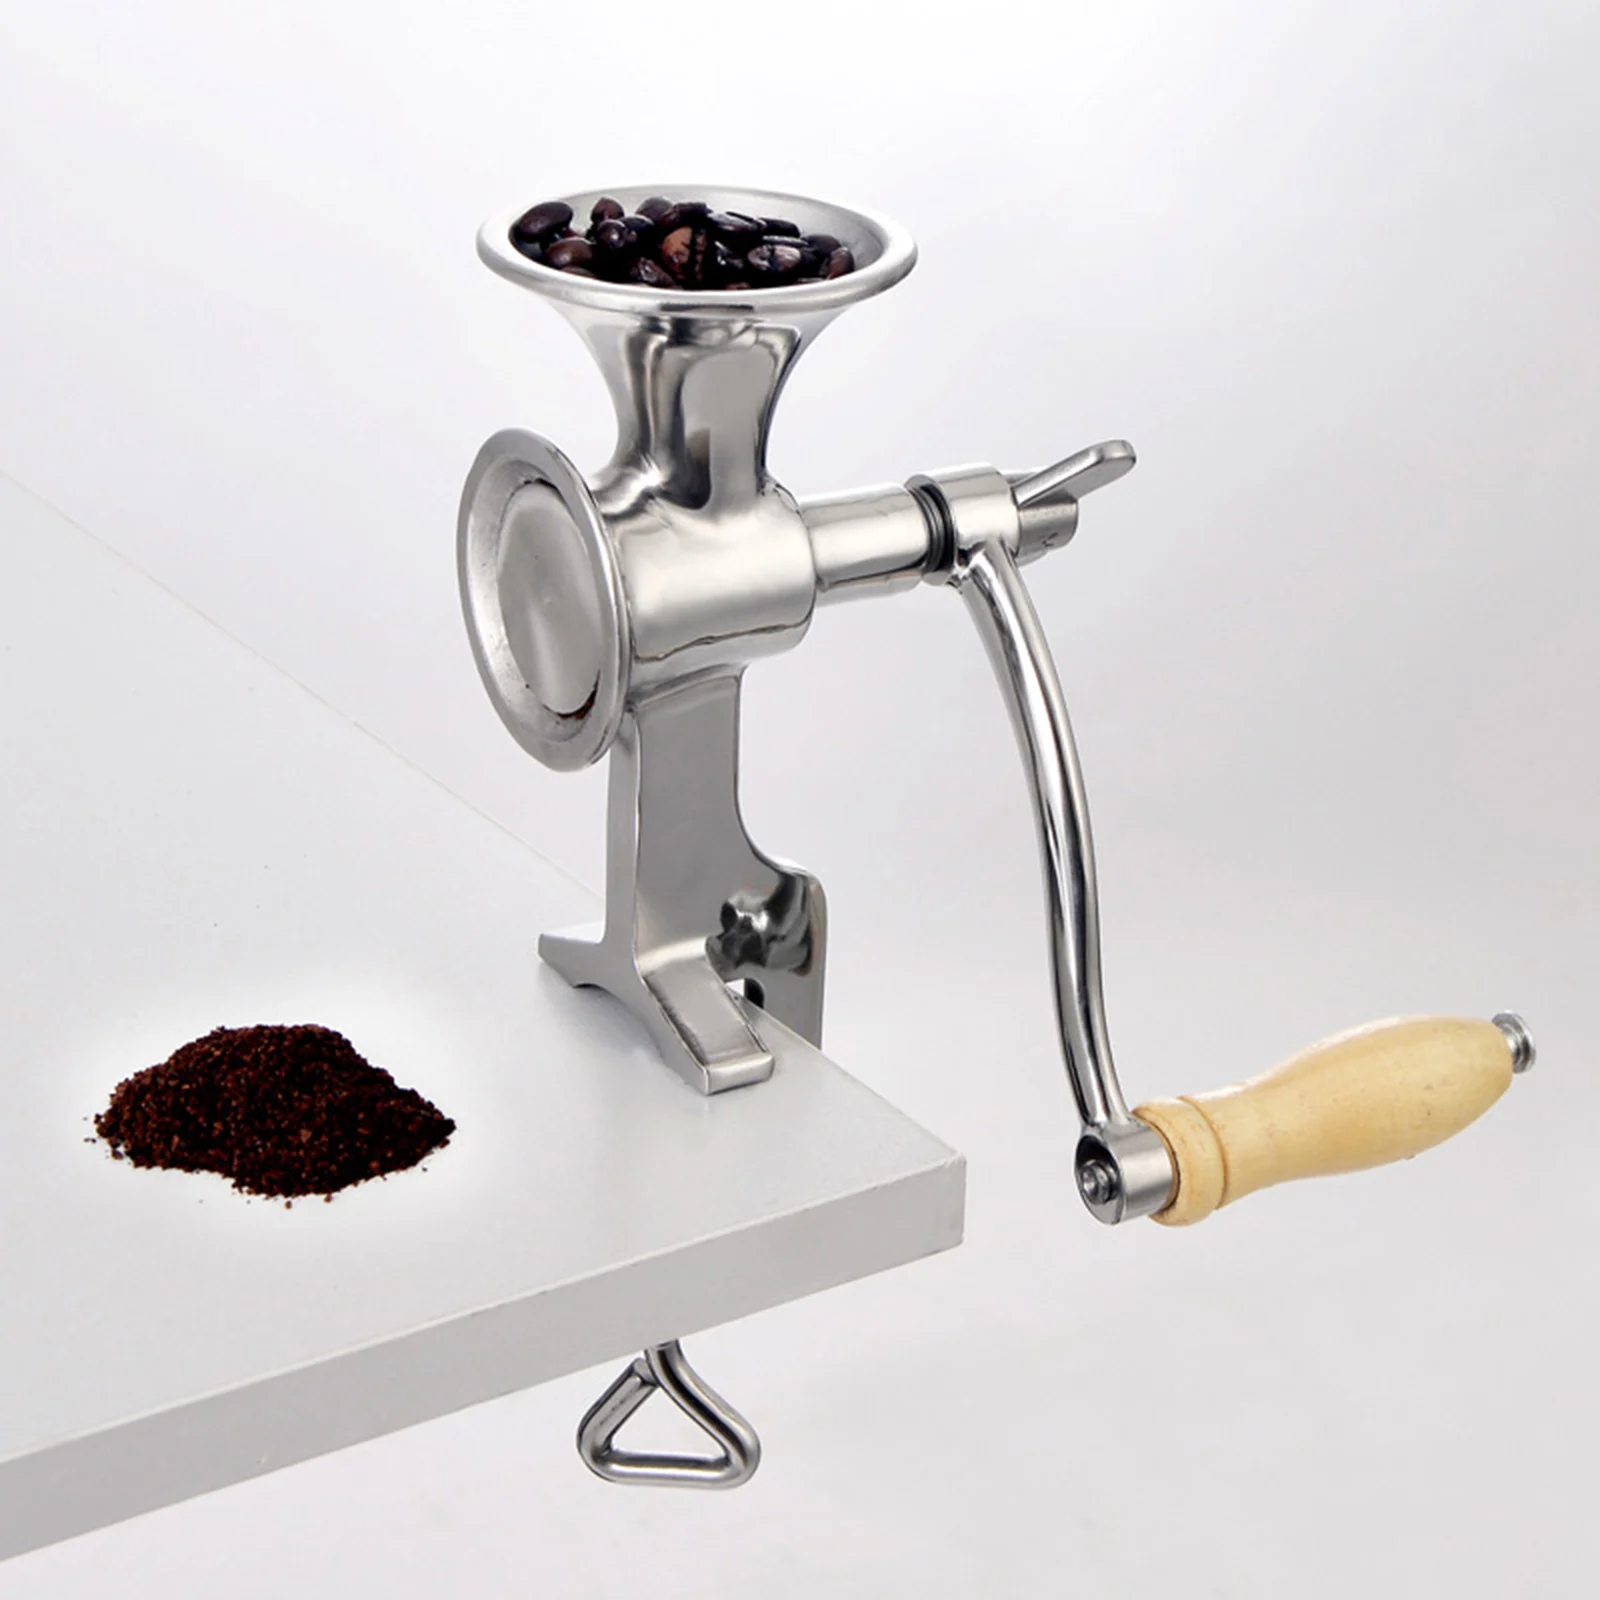 Hand Crank Grain Mill Stainless Steel Manual Grain Grinder for Seed Use